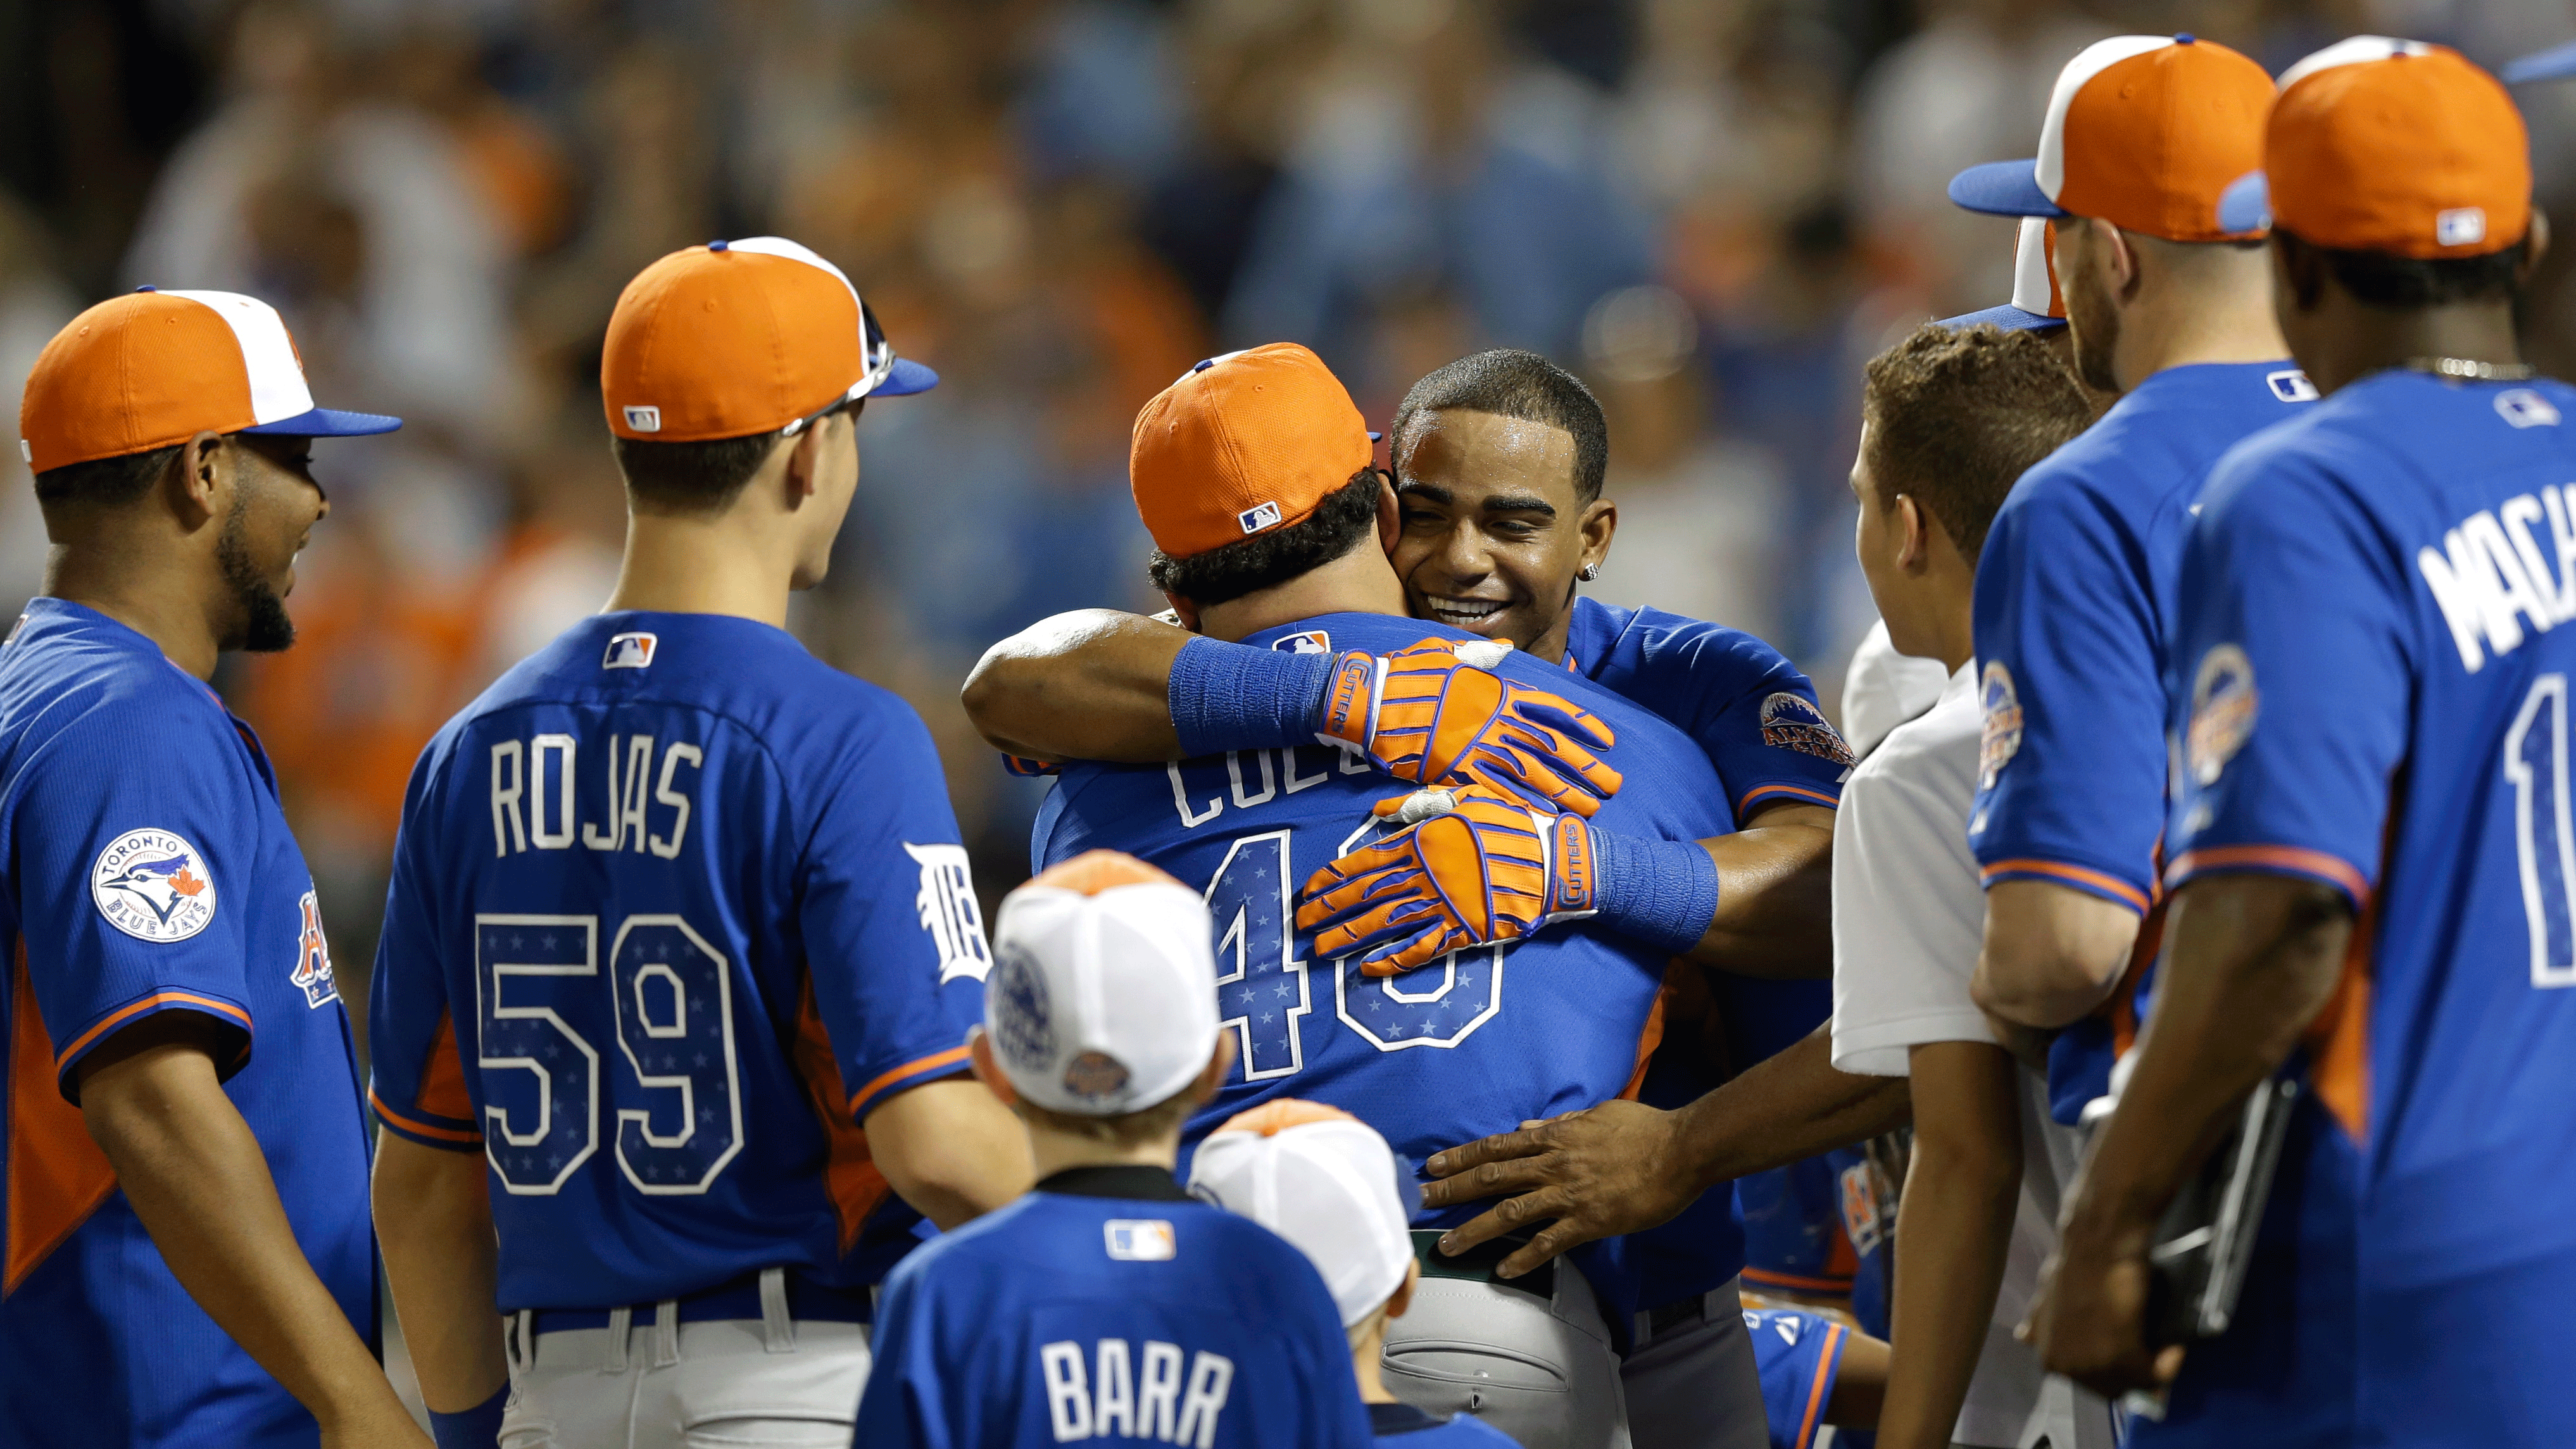 Yoenis Cespedes celebrates with teammates after winning the Home Run Derby. (AP/Kathy Willens)